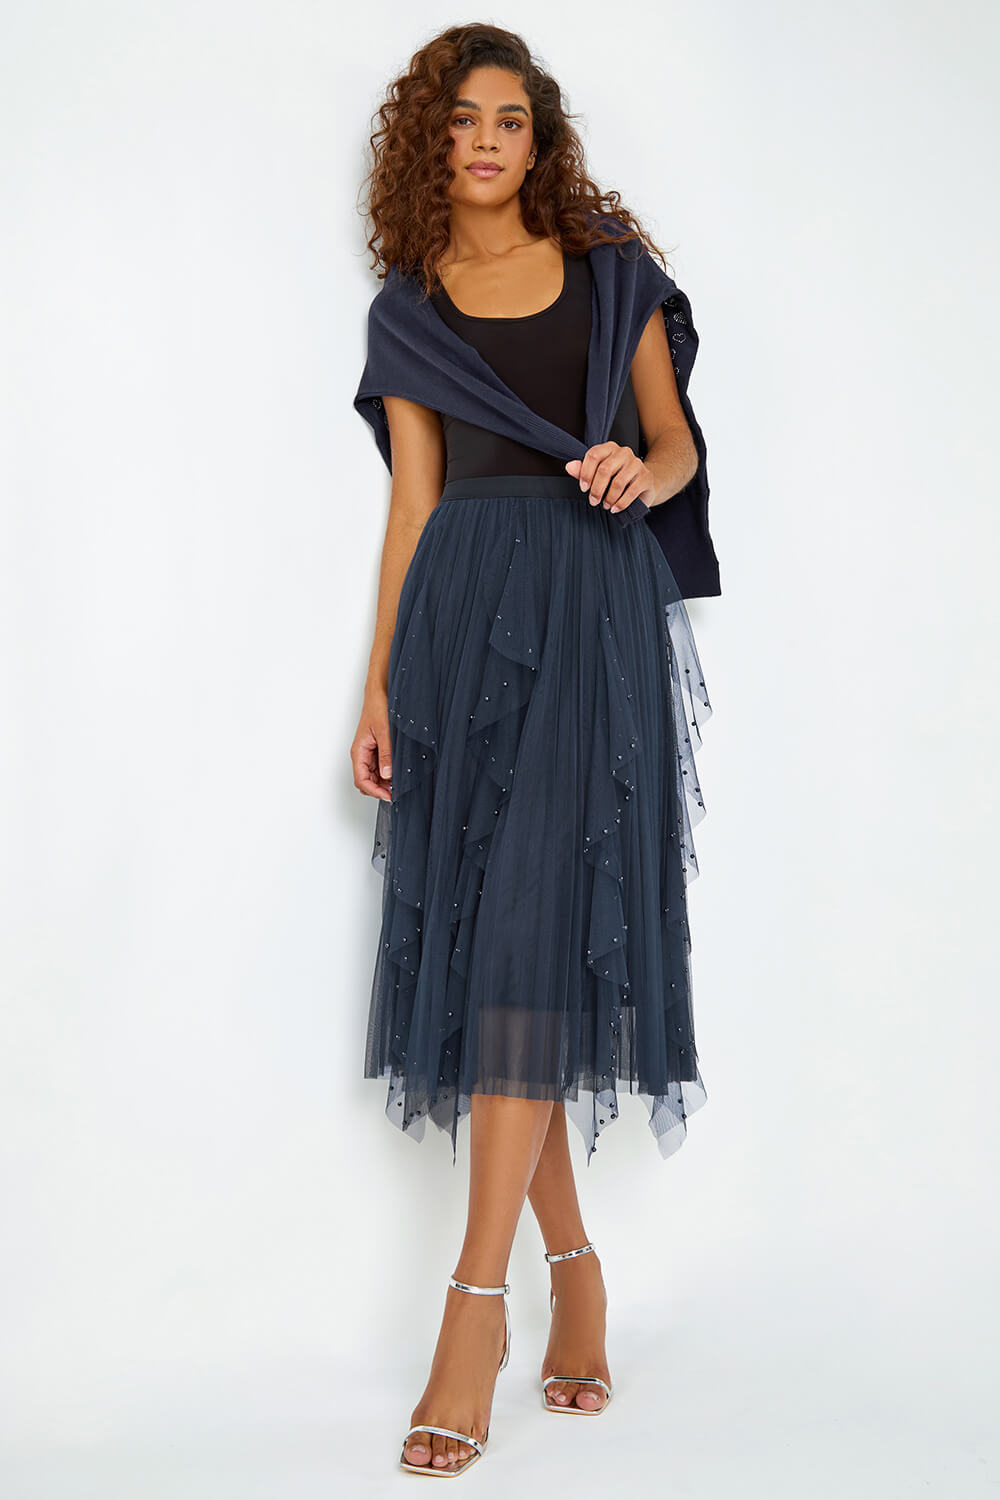 Midnight Blue Elasticated Pearl Mesh Layered Skirt, Image 1 of 5